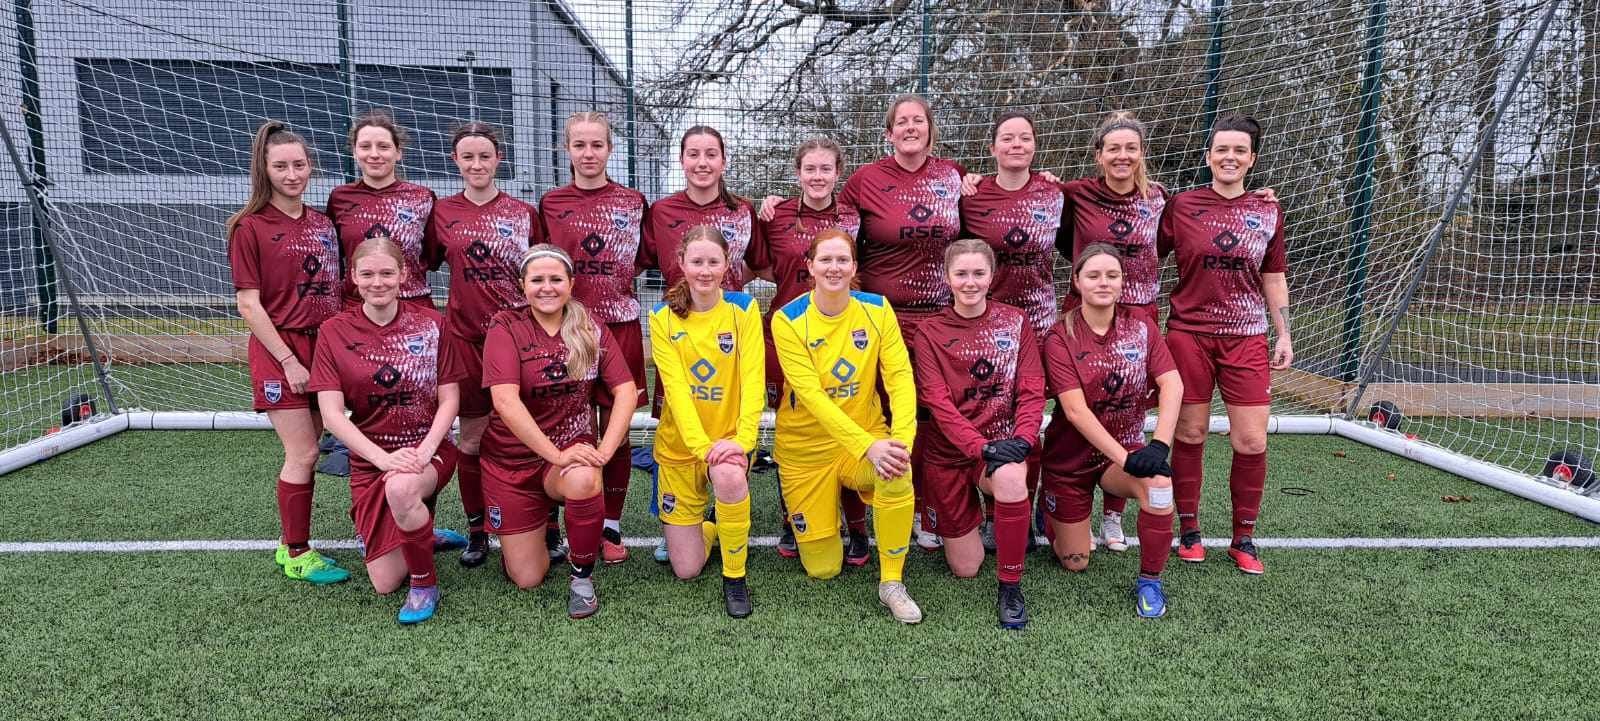 Ross County Women won 6-1 in their first ever Highlands and Islands League match.